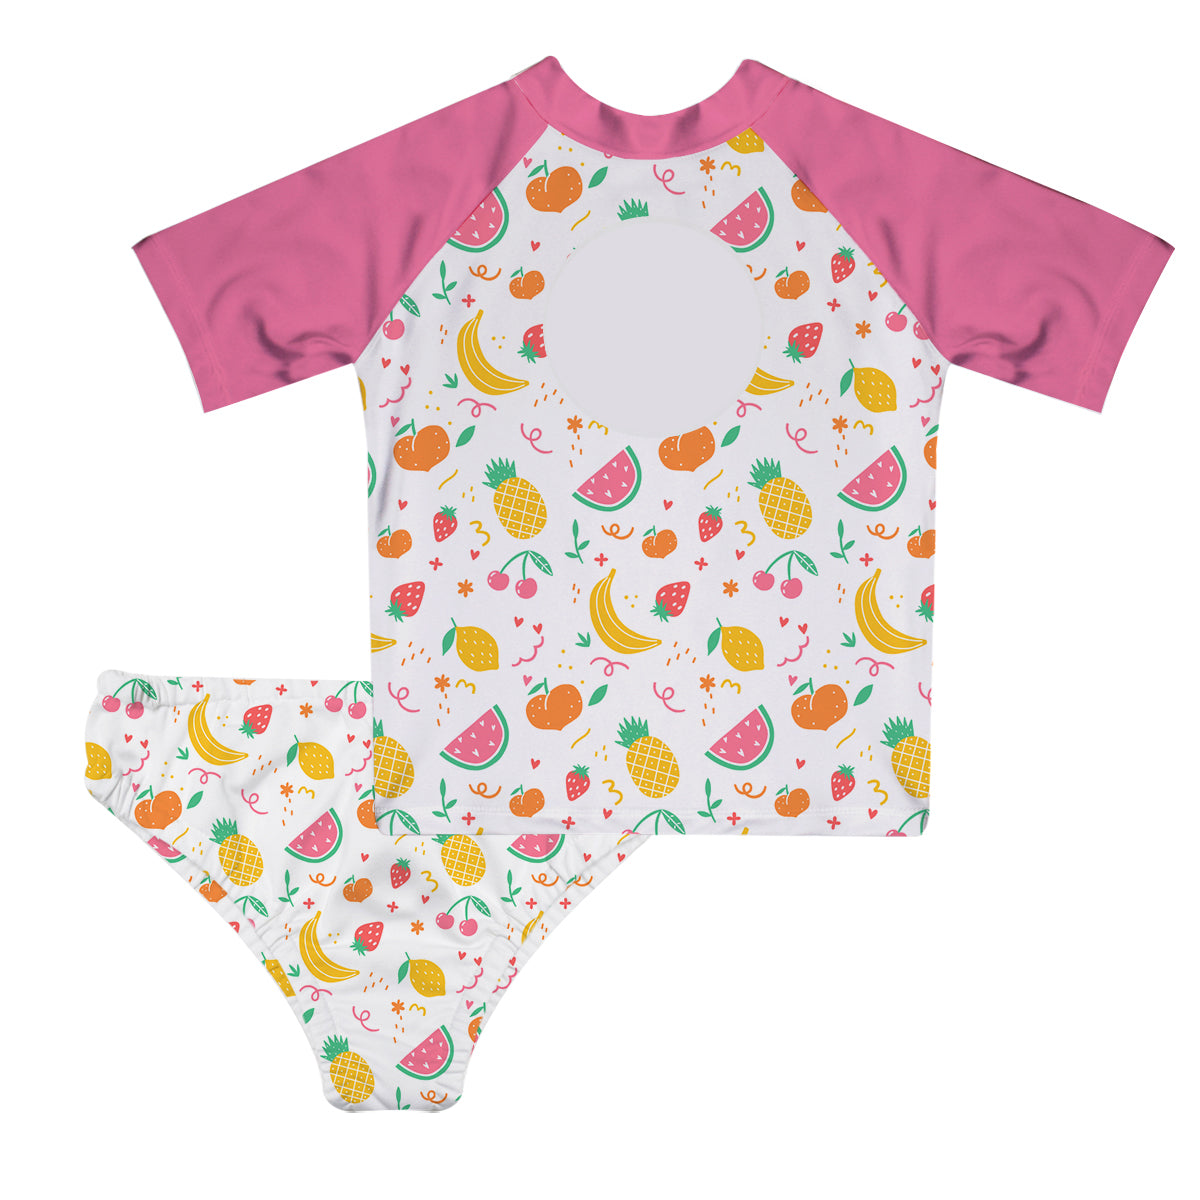 Fruits Print Personalized Monogram White and Pink 2pc Short Sleeve Rash Guard - Wimziy&Co.